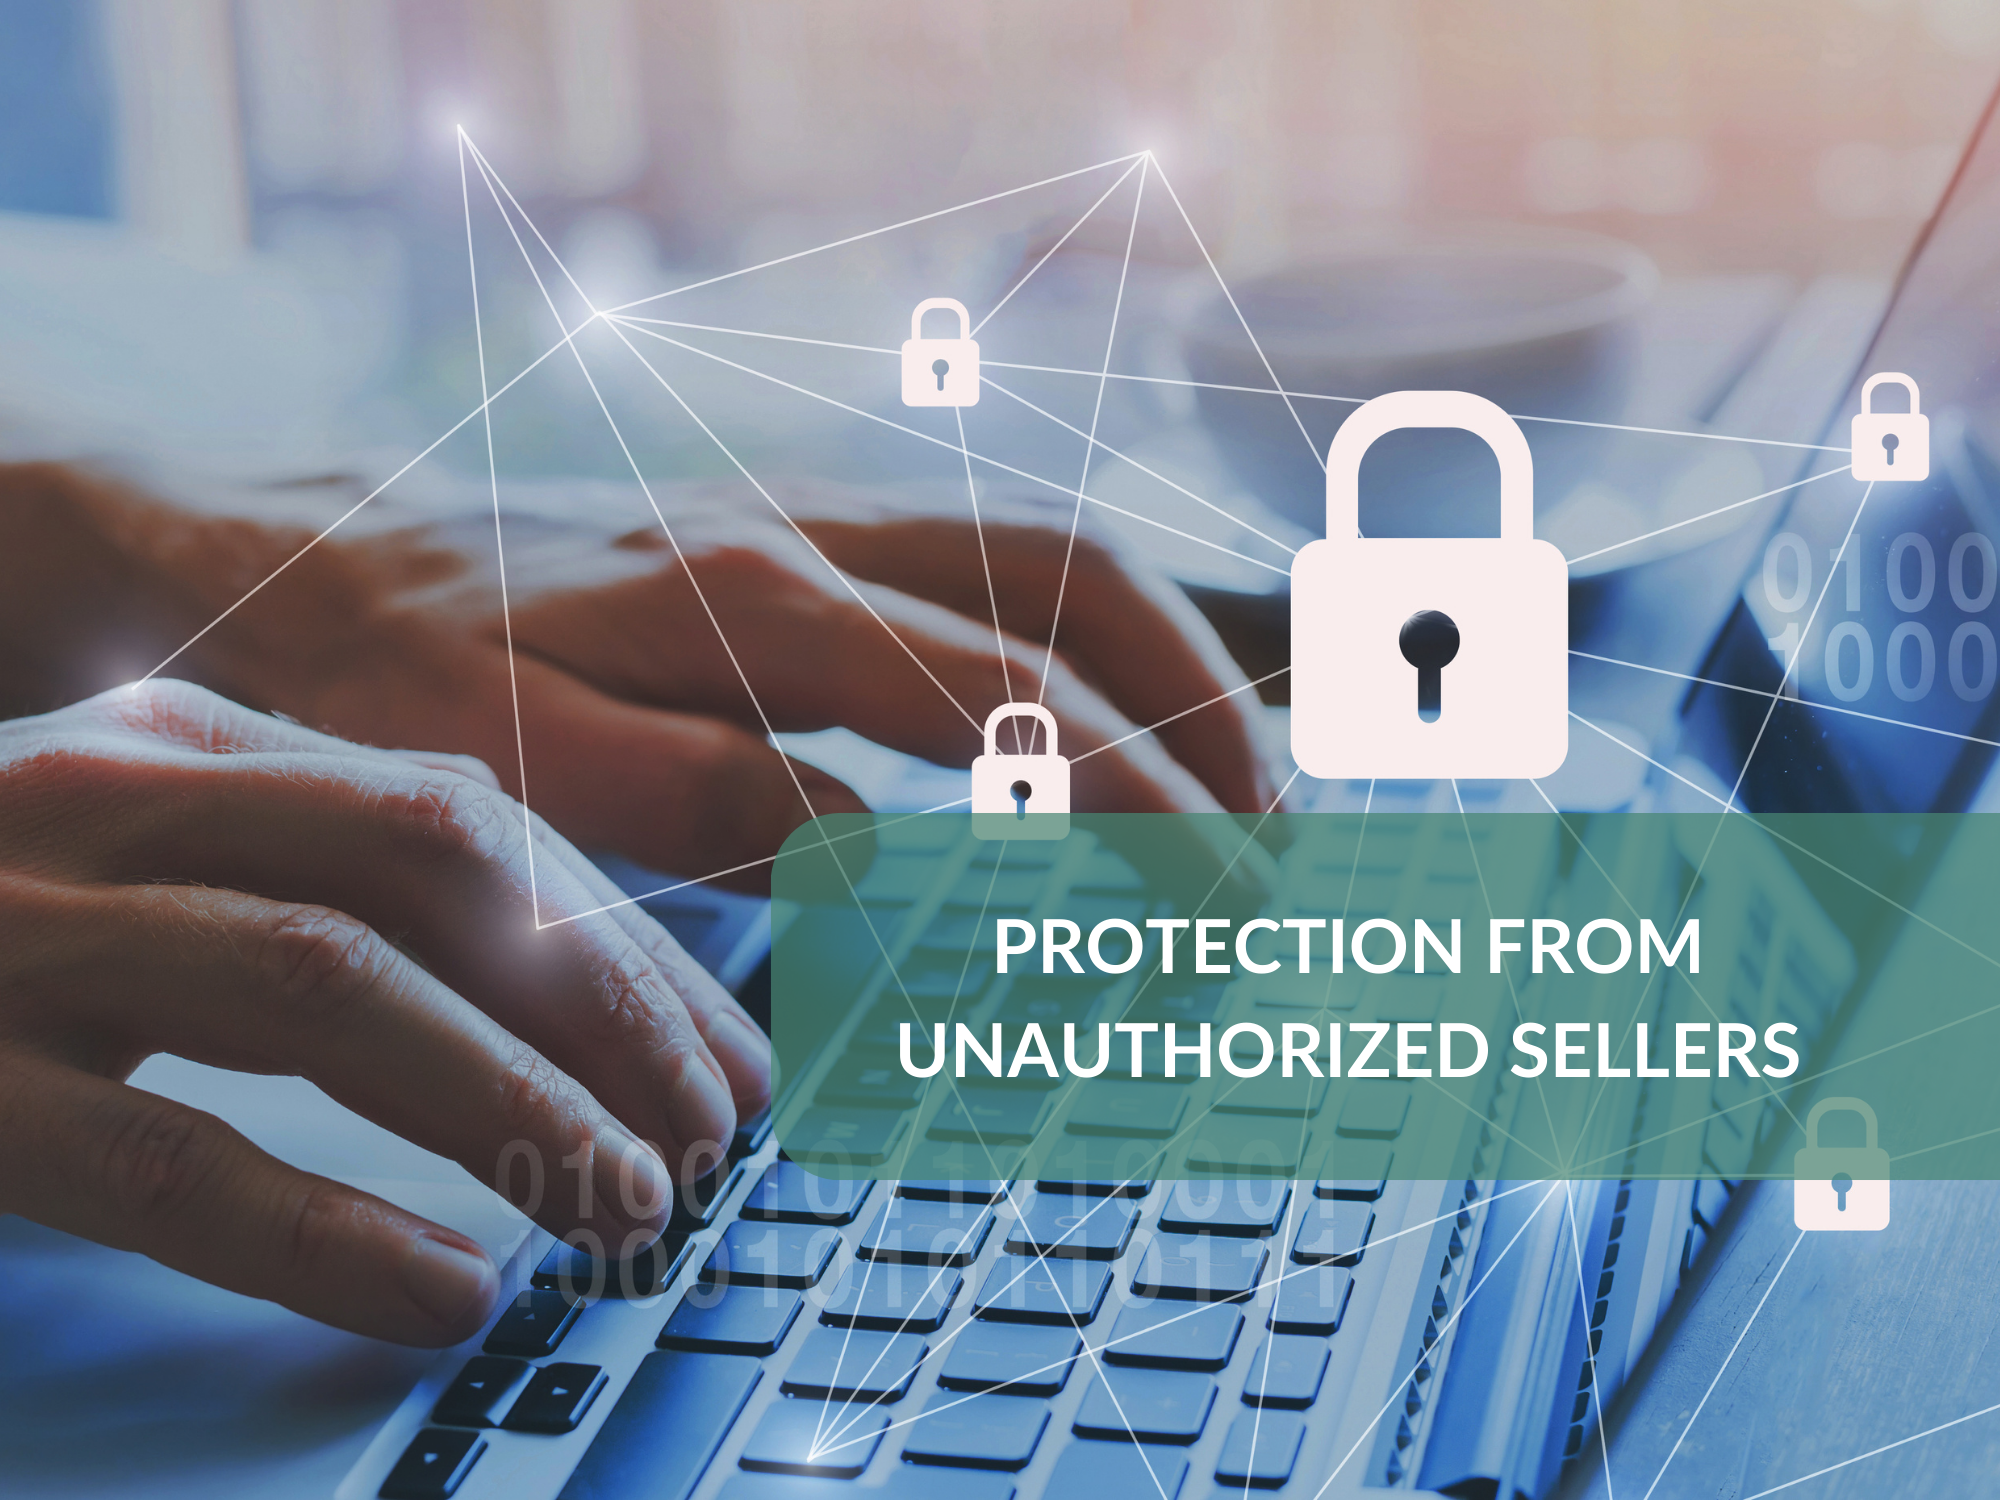 Protection from unauthorized sellers